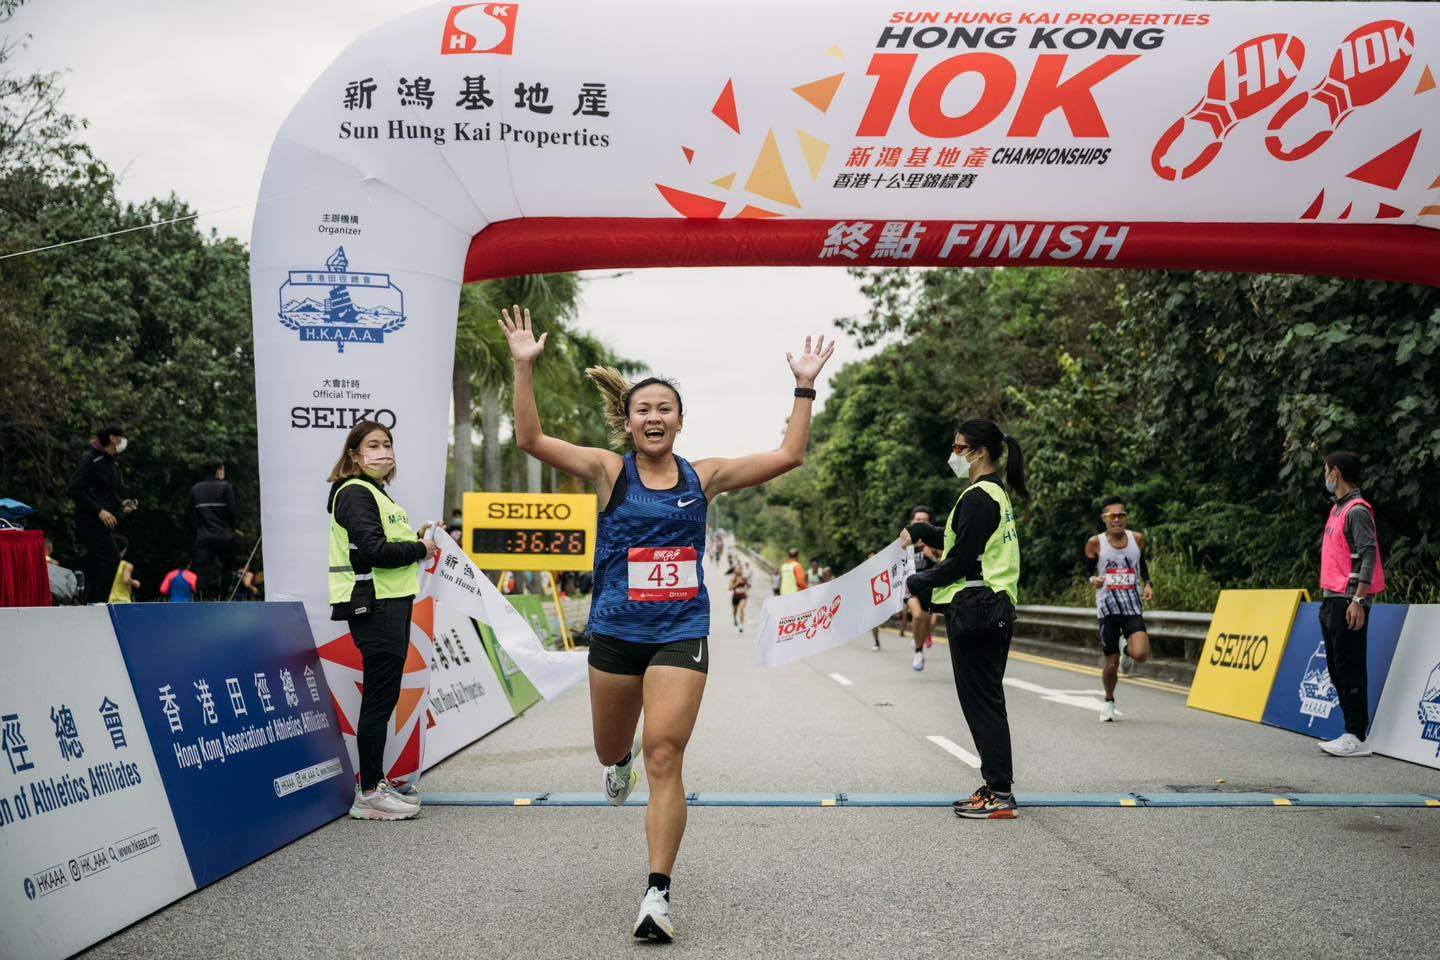 21-year-old Wong Cheuk-ning was the first to cross the finish line of the Hong Kong 10k Championships last month. Photo: HKAAA